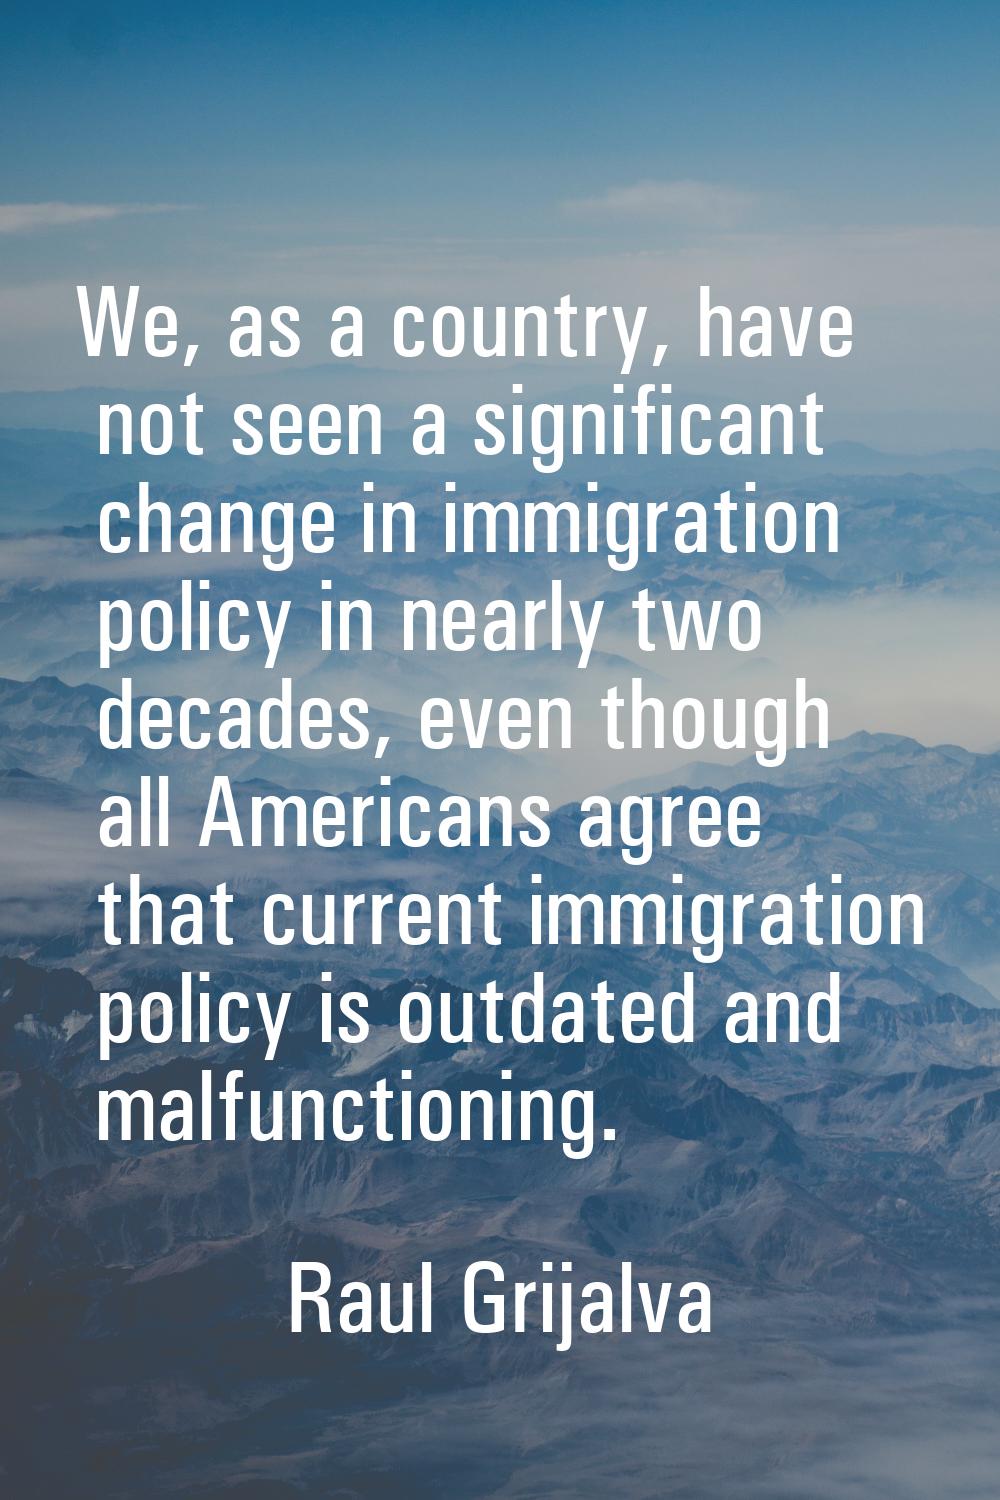 We, as a country, have not seen a significant change in immigration policy in nearly two decades, e